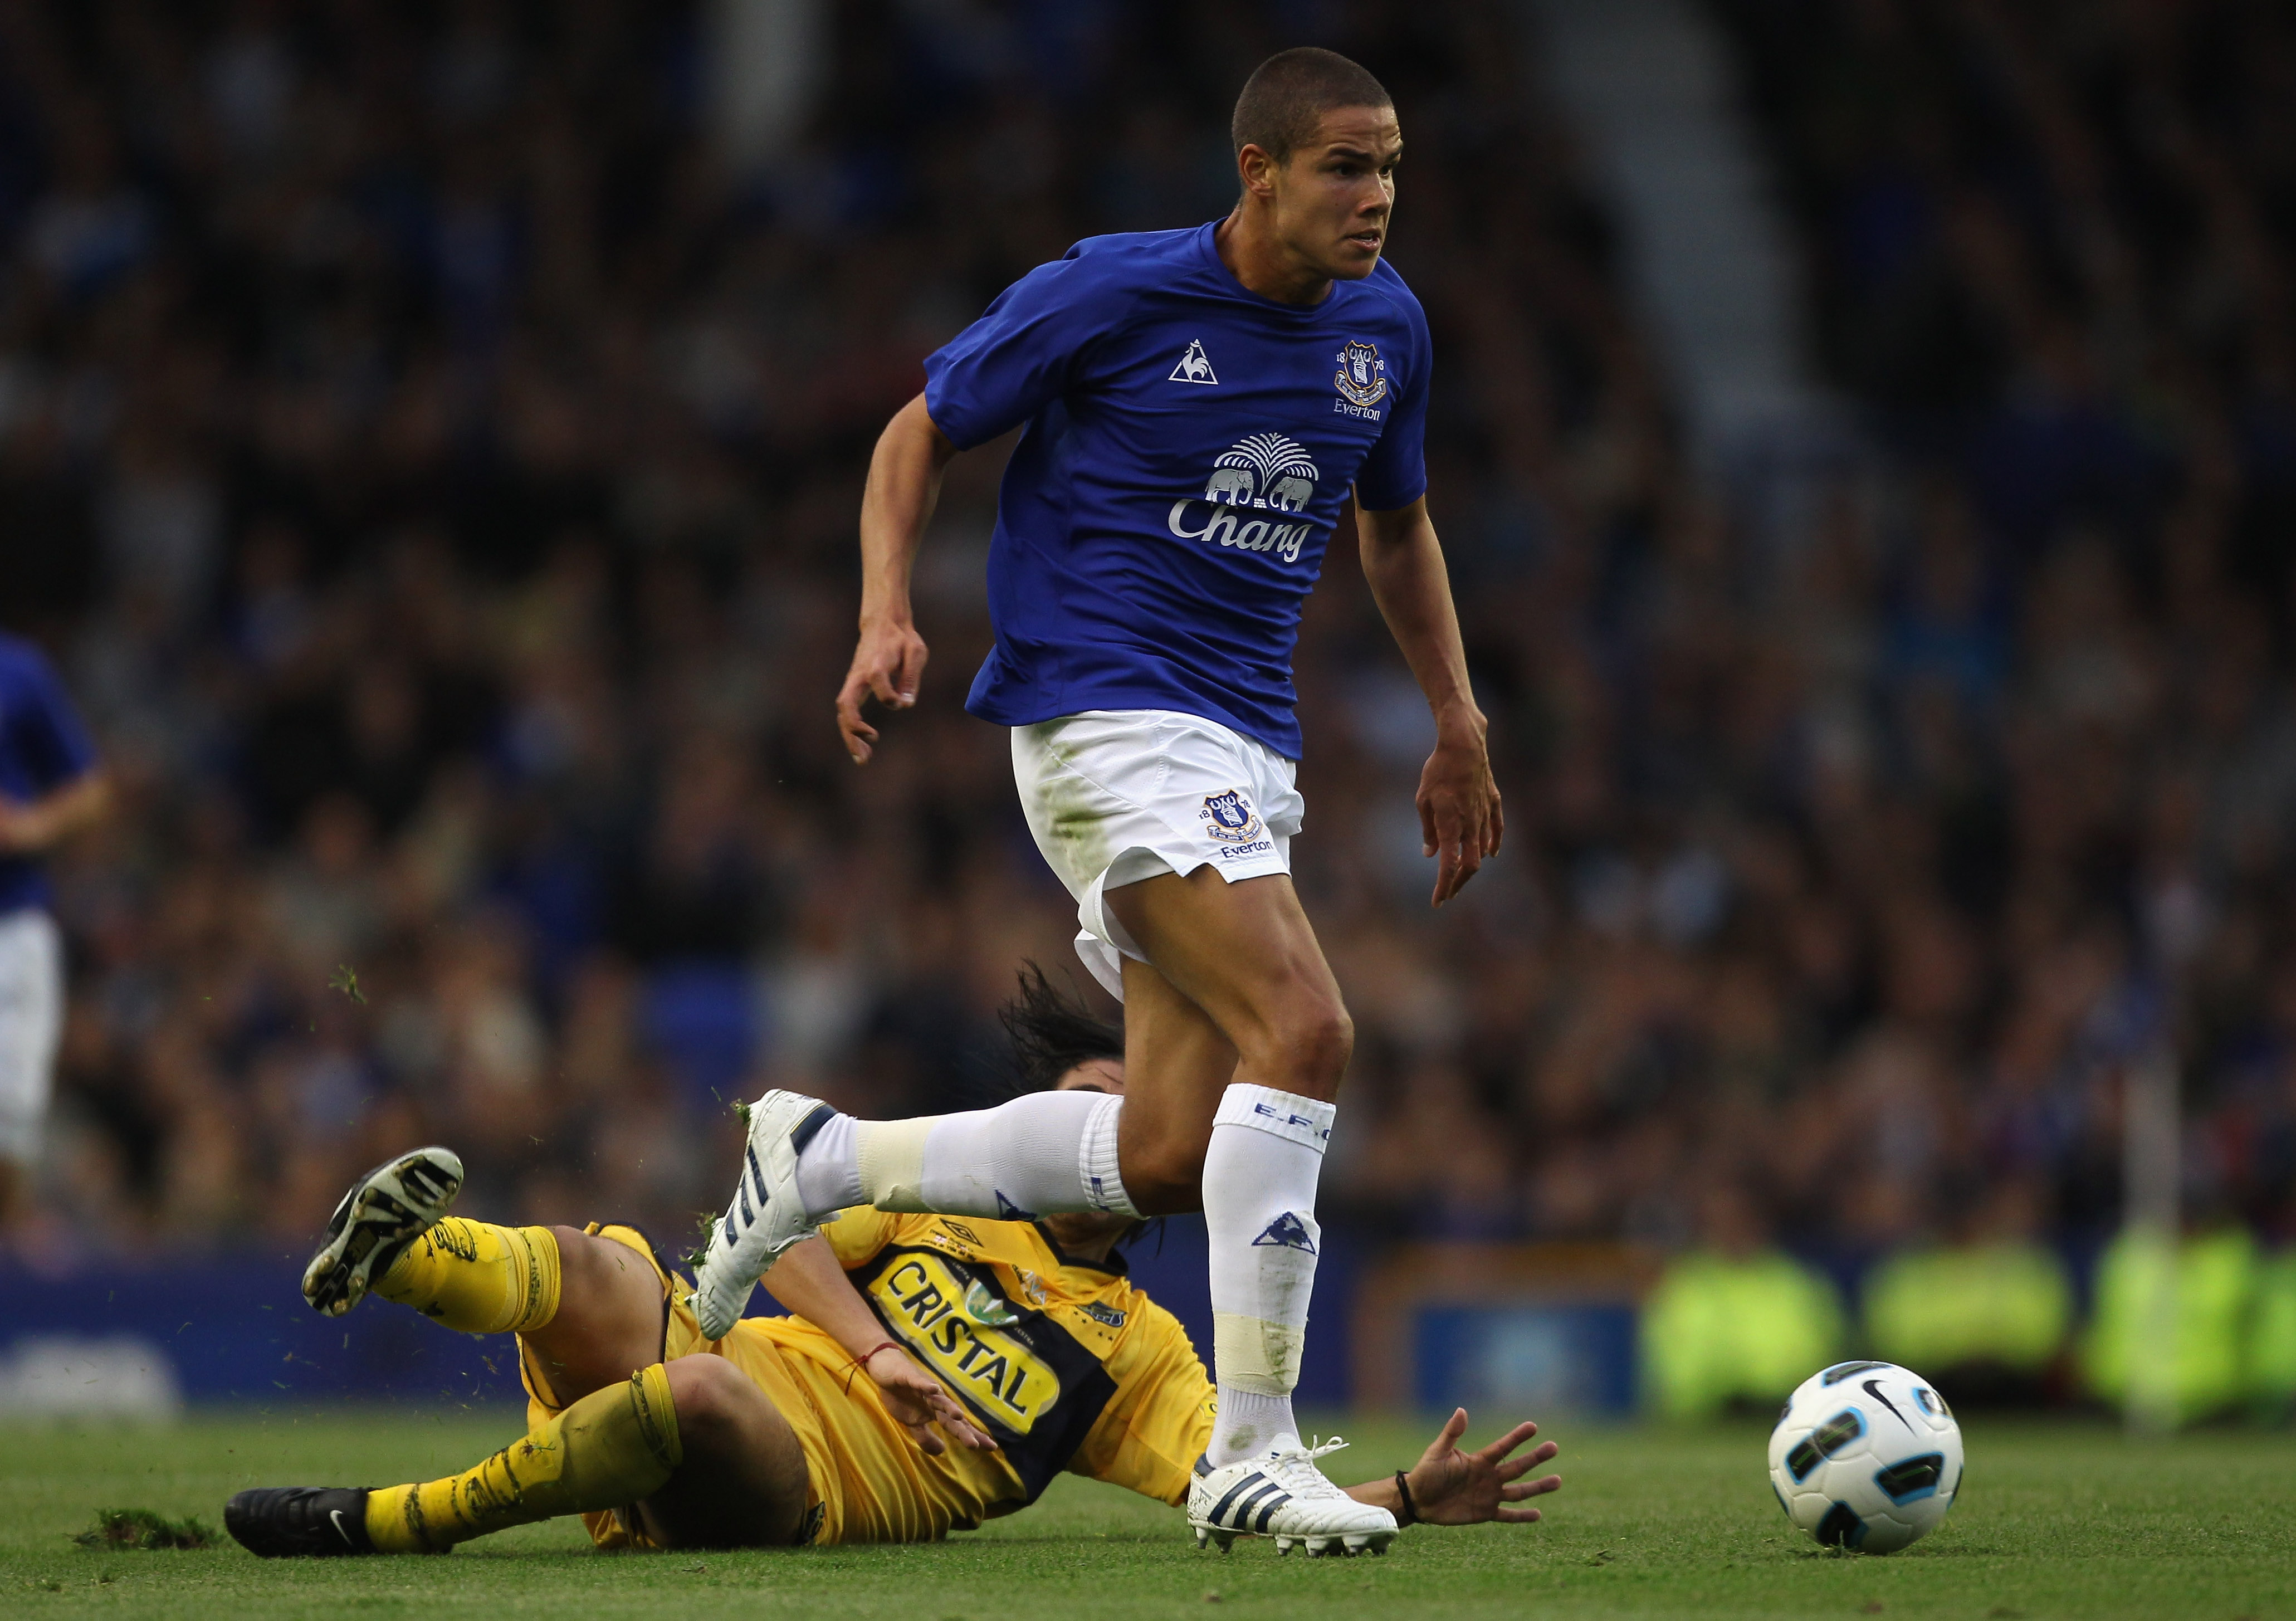 LIVERPOOL, ENGLAND - AUGUST 04:  Jack Rodwell  of Everton beats Cesar Daniel Garipe of Everton Chile during the pre-season friendly match between Everton and Everton Chile at Goodison Park on August 4, 2010 in Liverpool, England.  (Photo by Alex Livesey/G